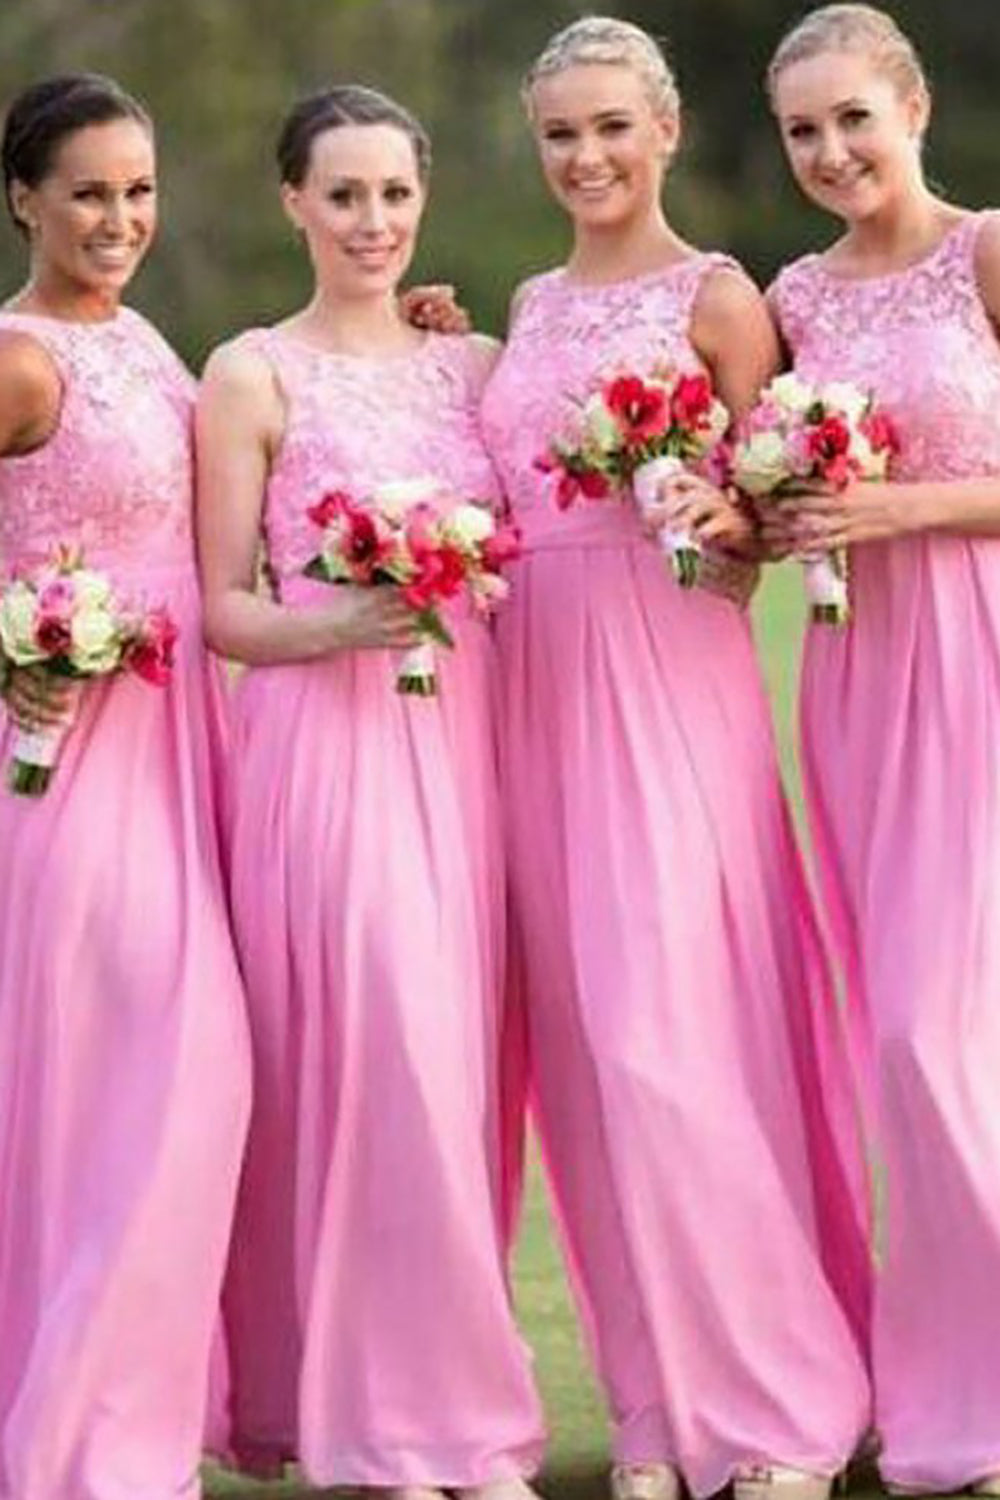 Boat Neck Pink Long Bridesmaid Dress with Lace